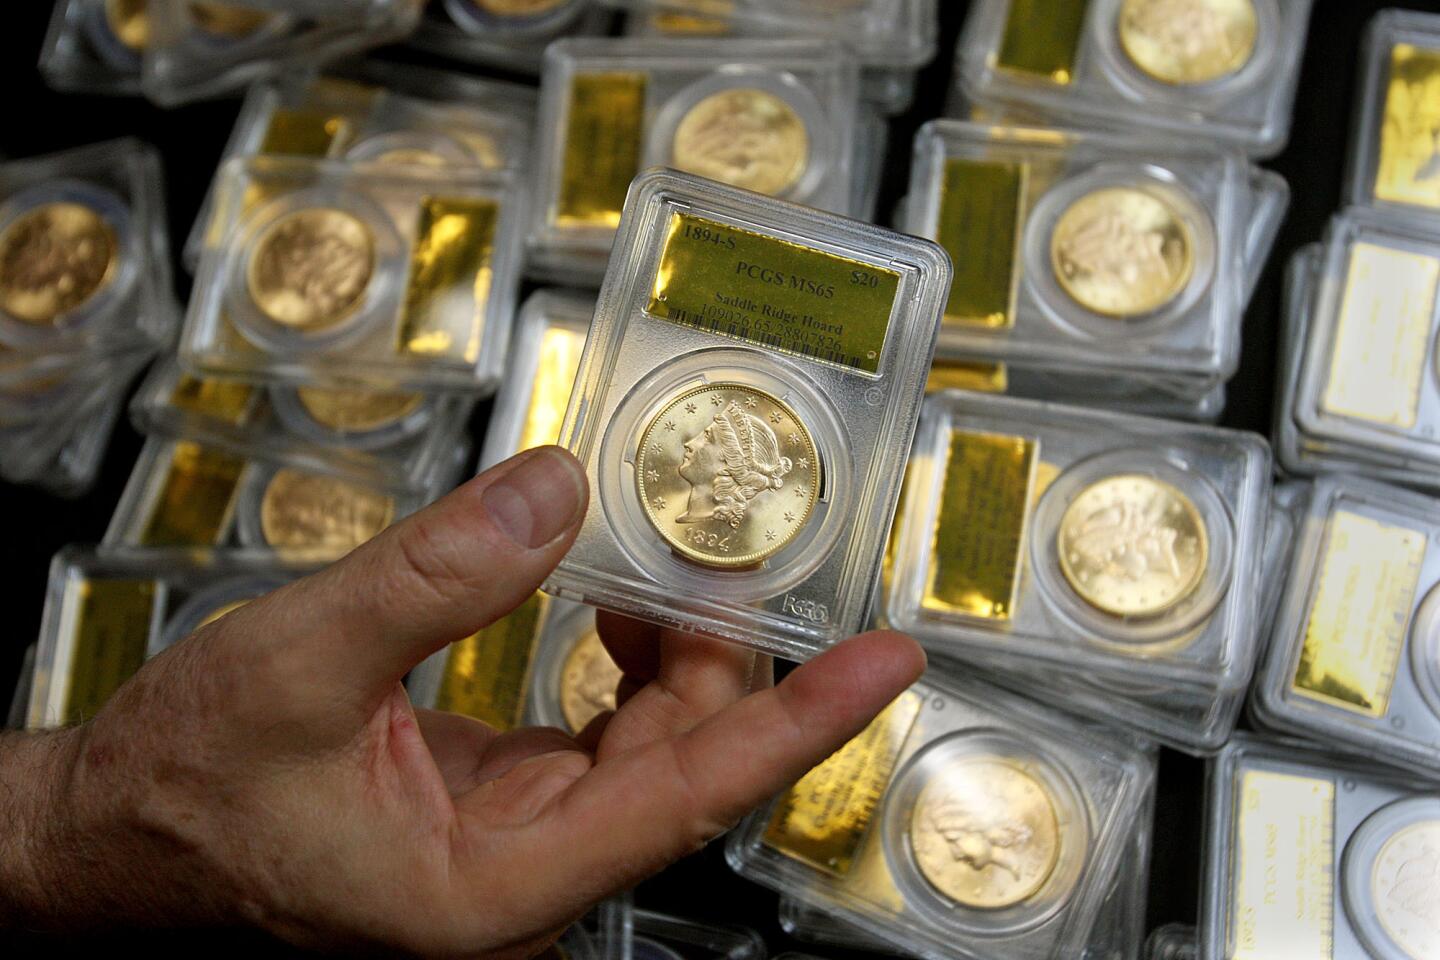 Some of 1,427 Gold Rush-era U.S. gold coins found buried in the Salinas Valley are displayed at Professional Coin Grading Service in Santa Ana.